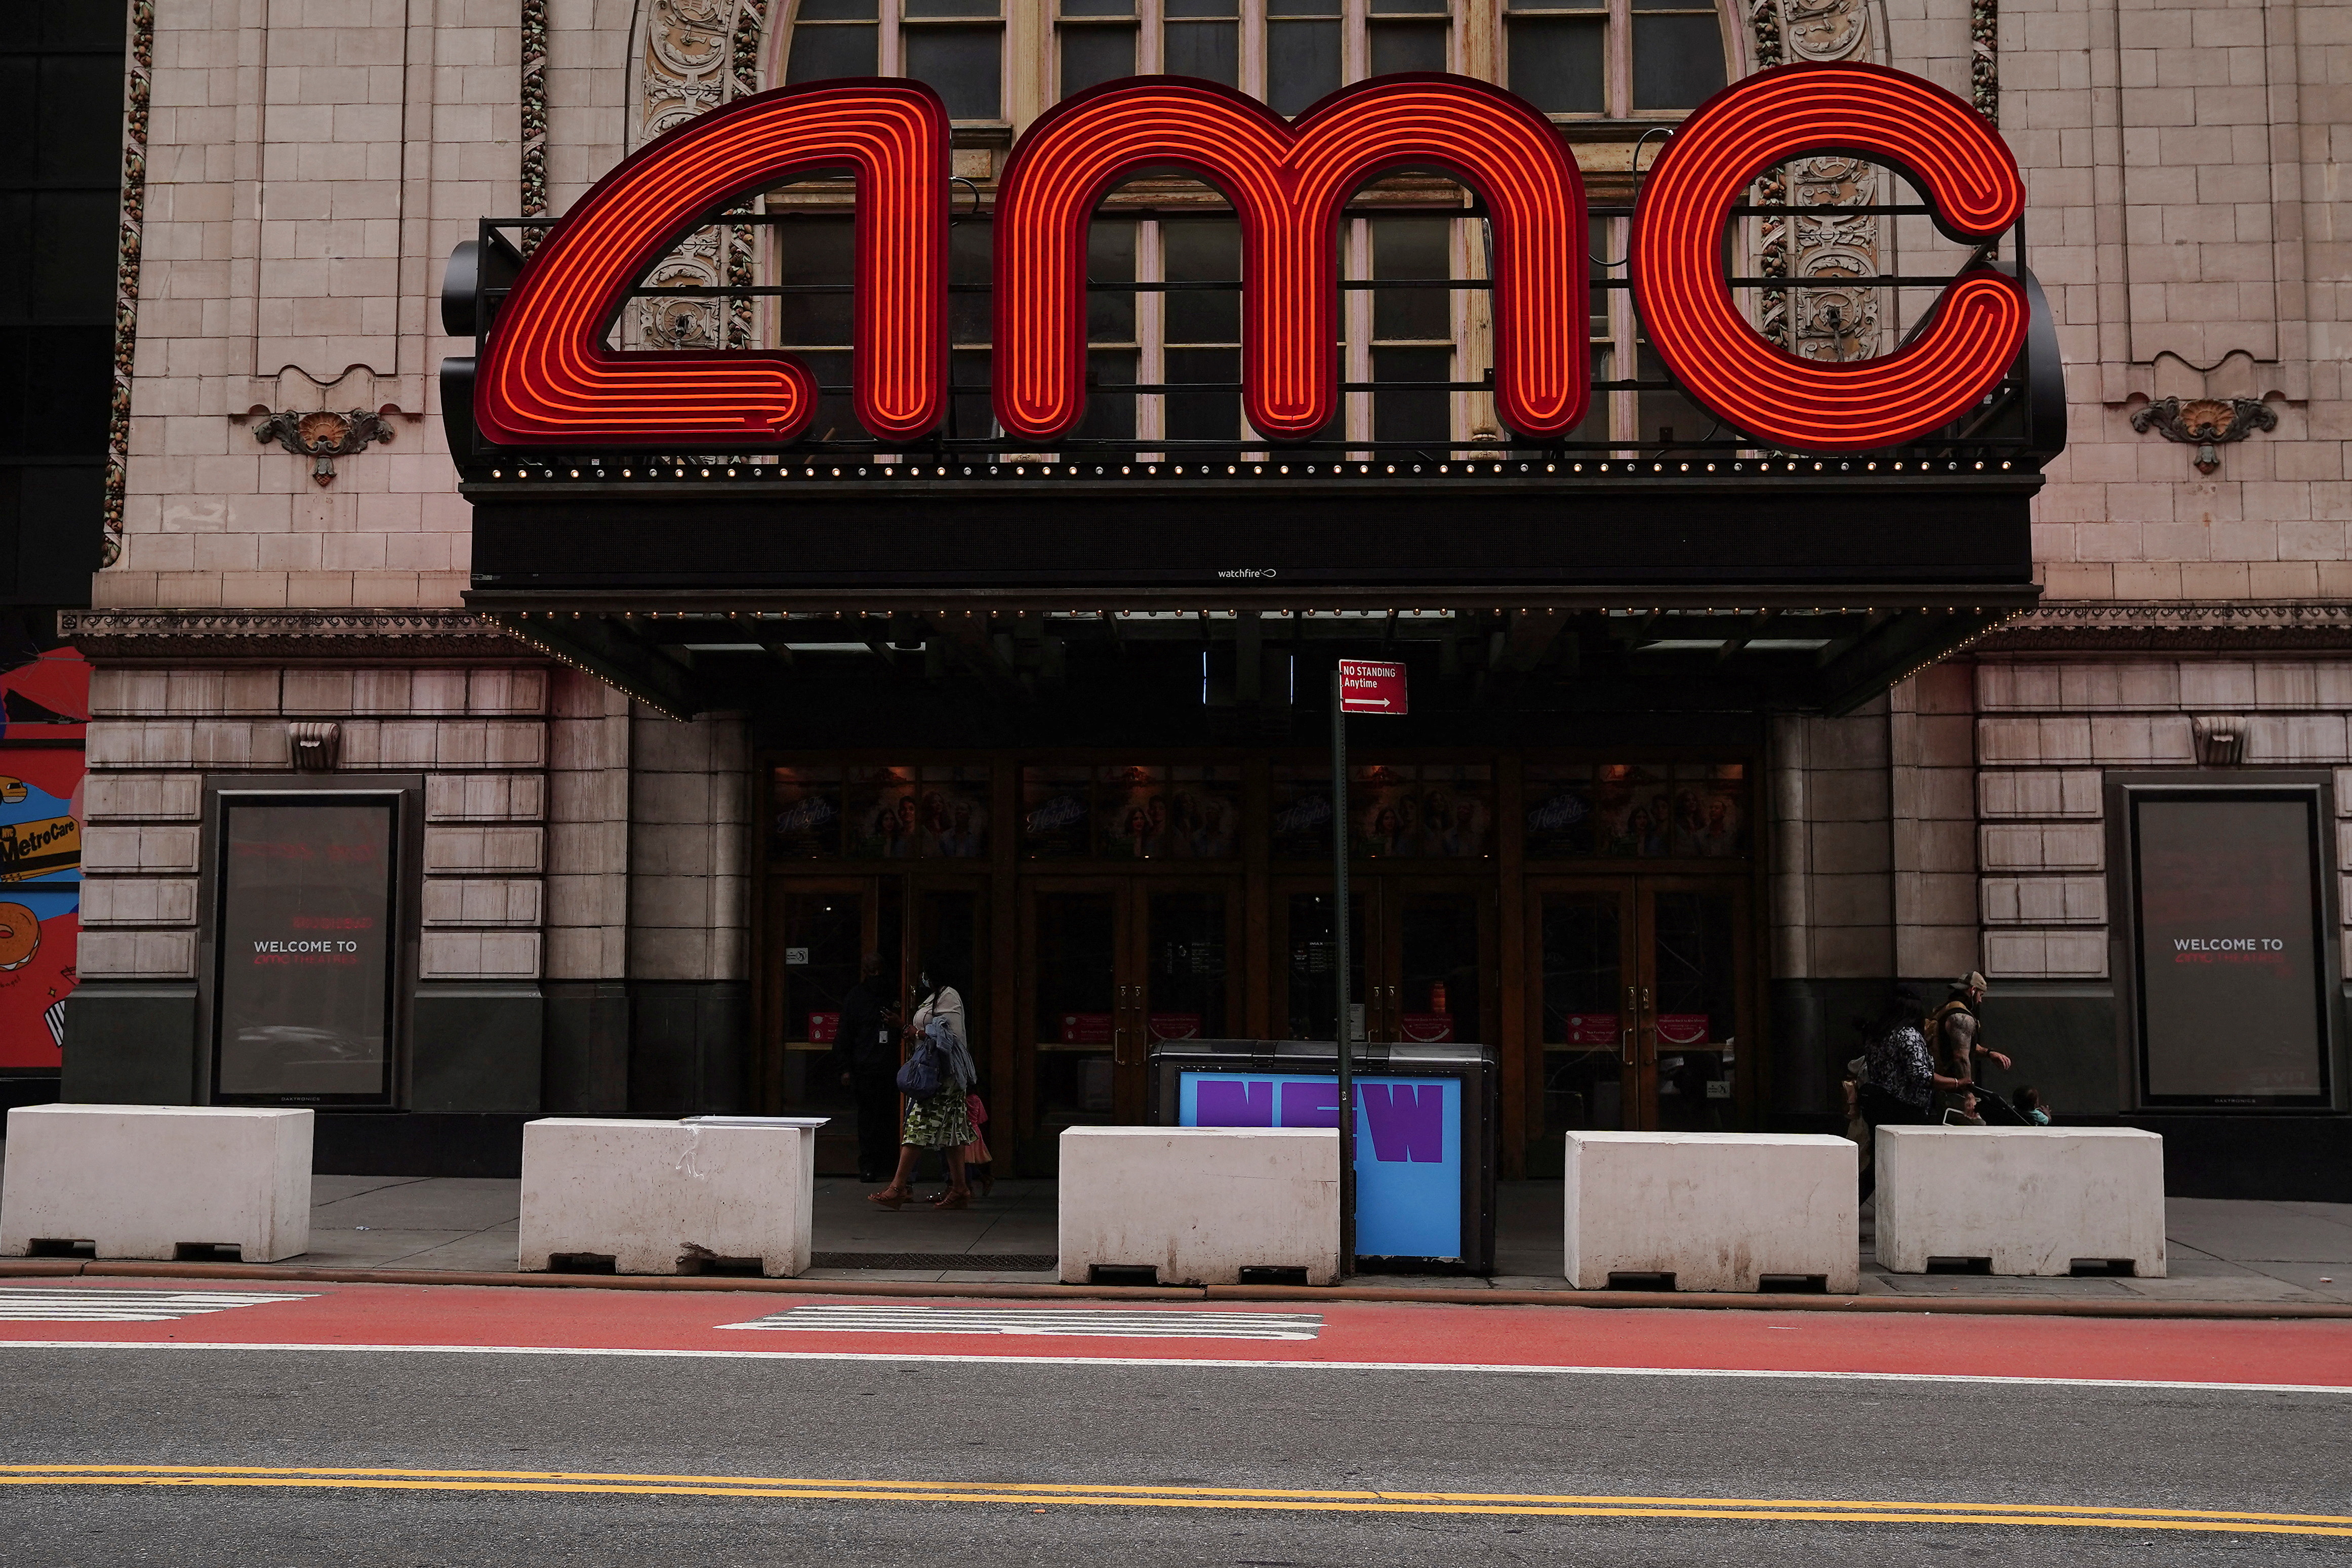 An AMC theatre is pictured in Times Square in New York City